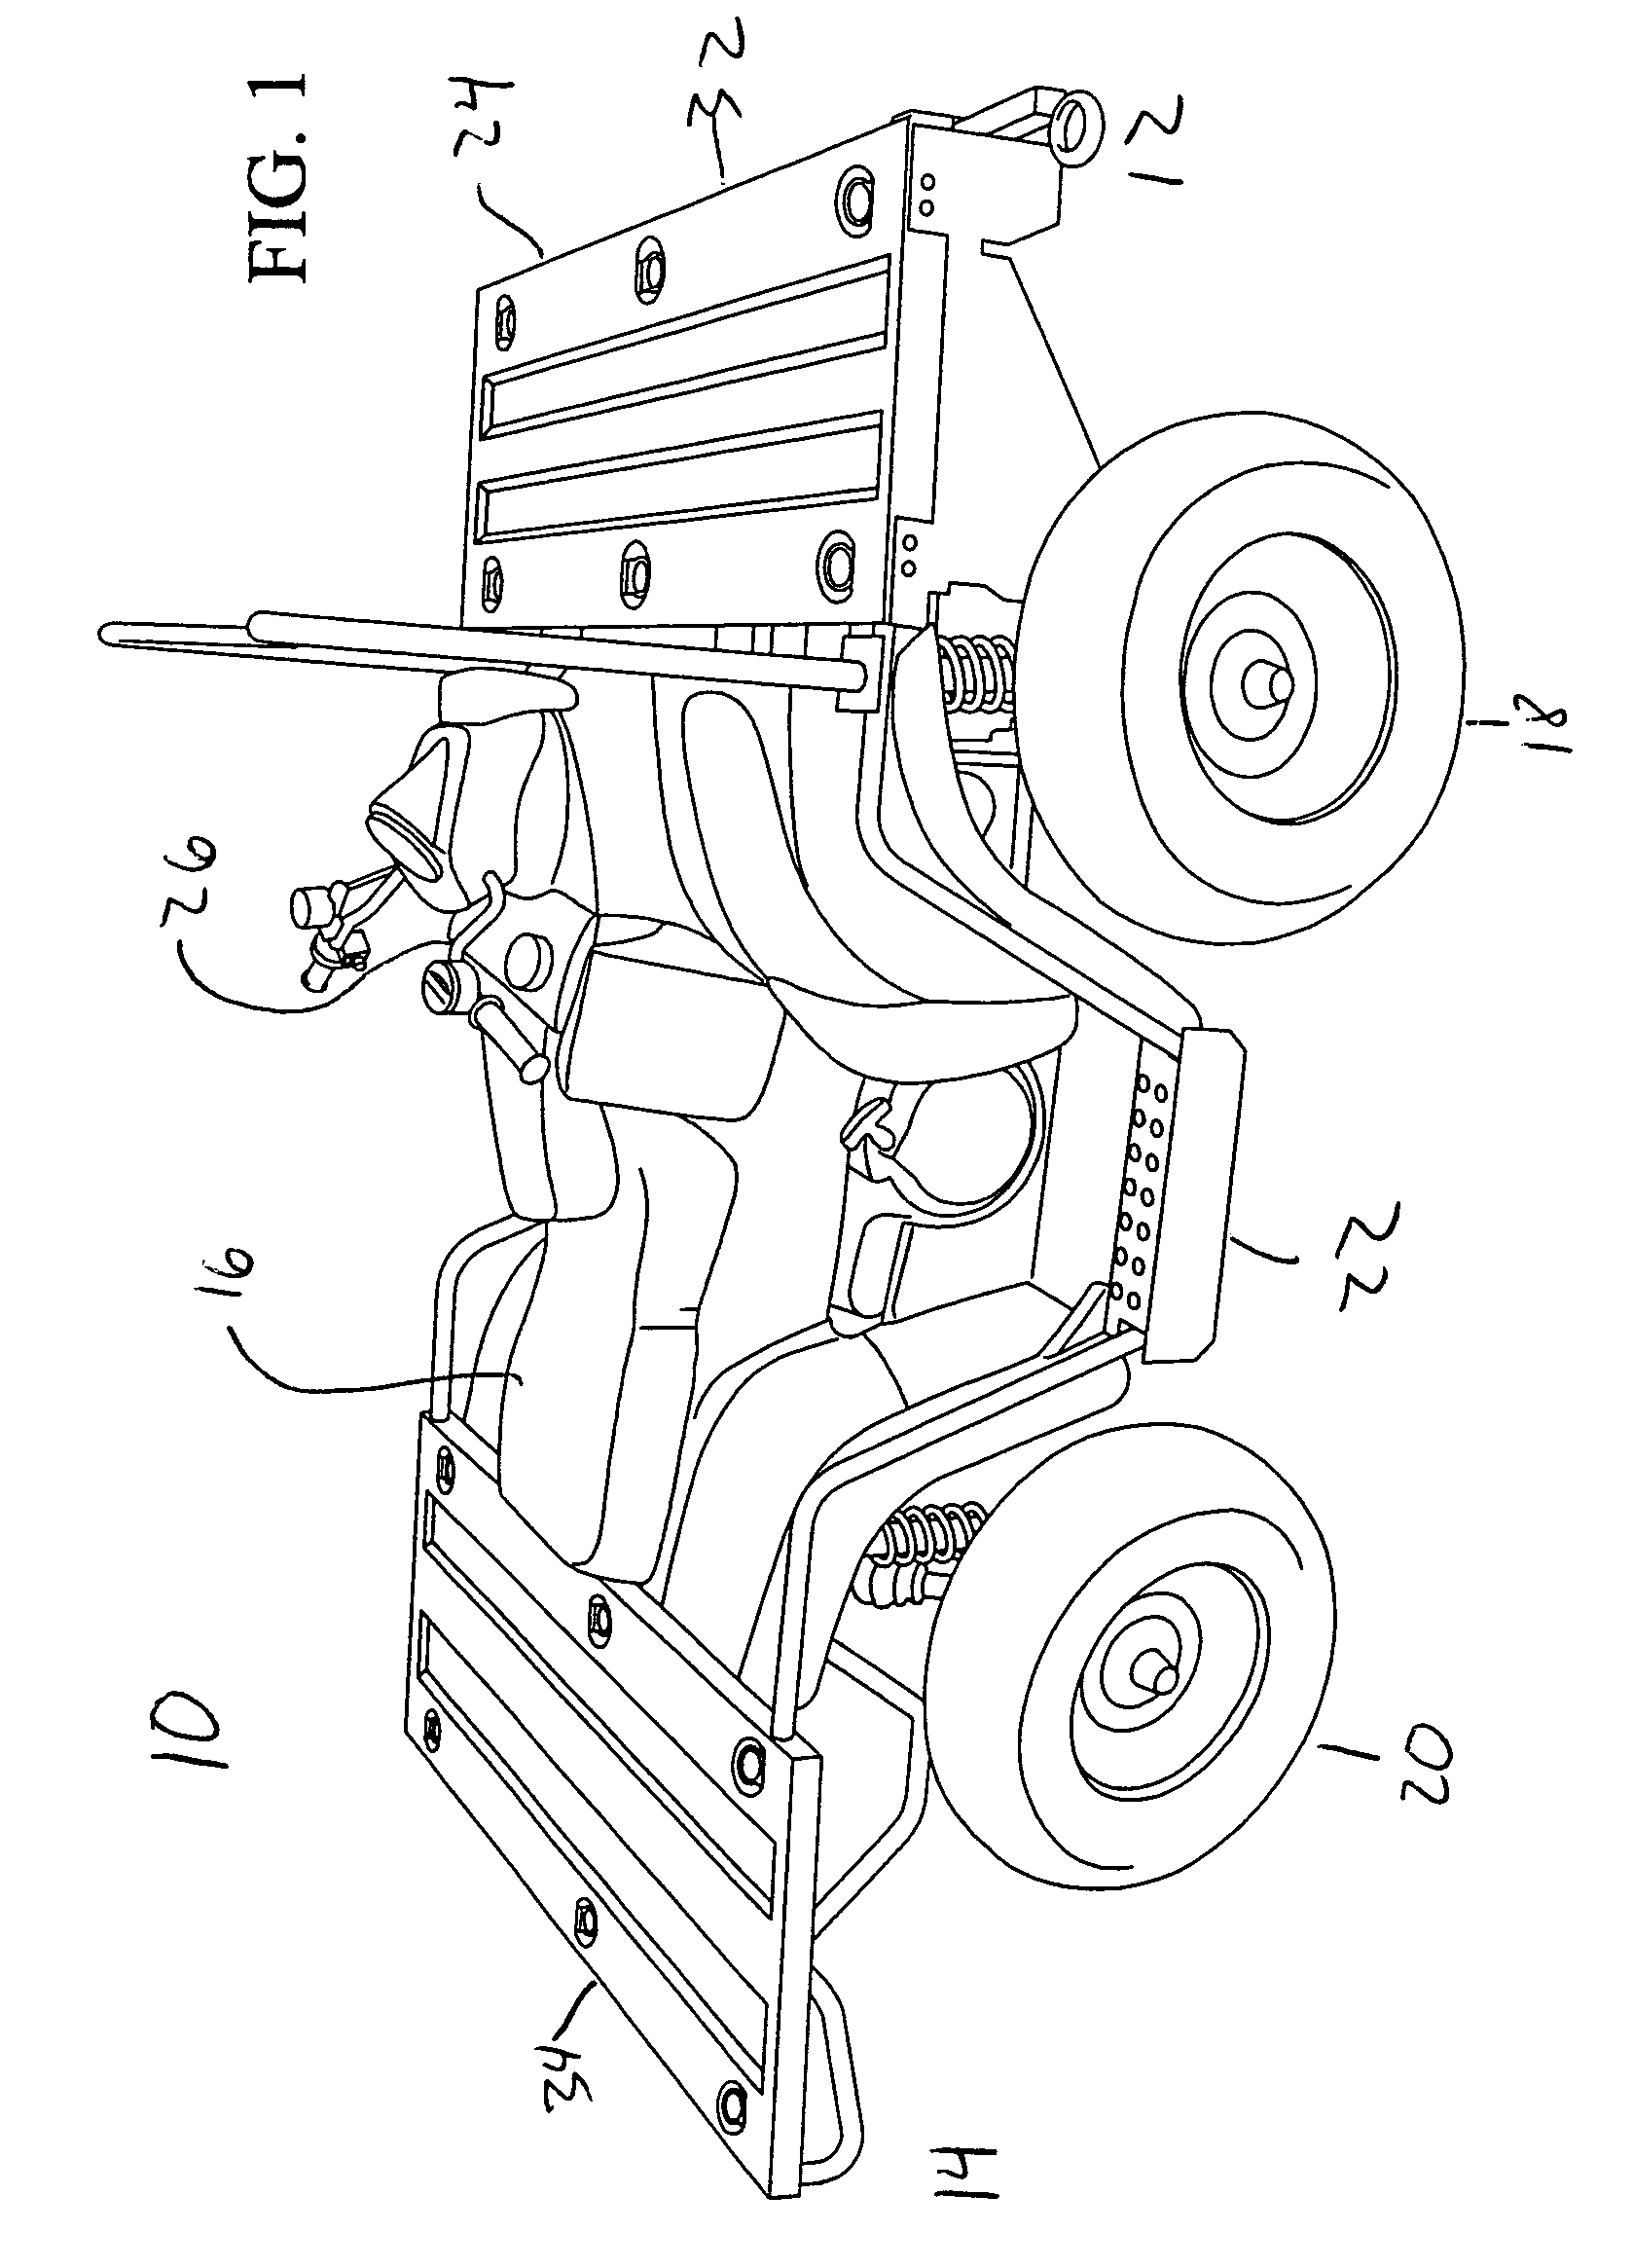 All terrain vehicle with multiple winches